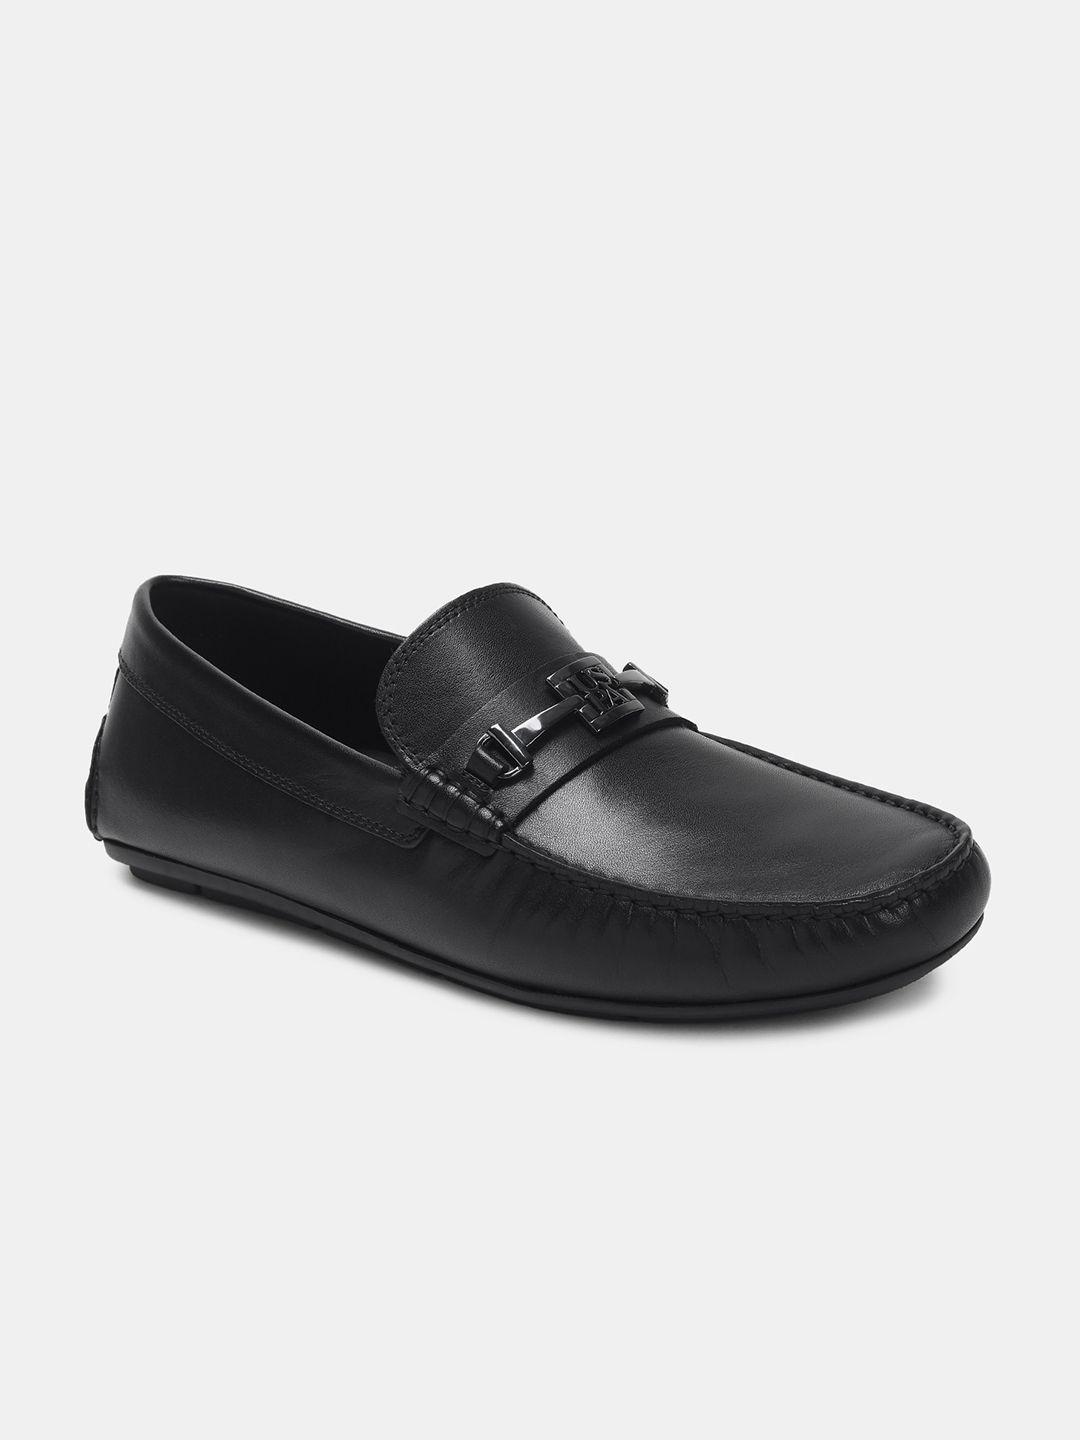 u-s-polo-assn-men-leather-driving-shoes